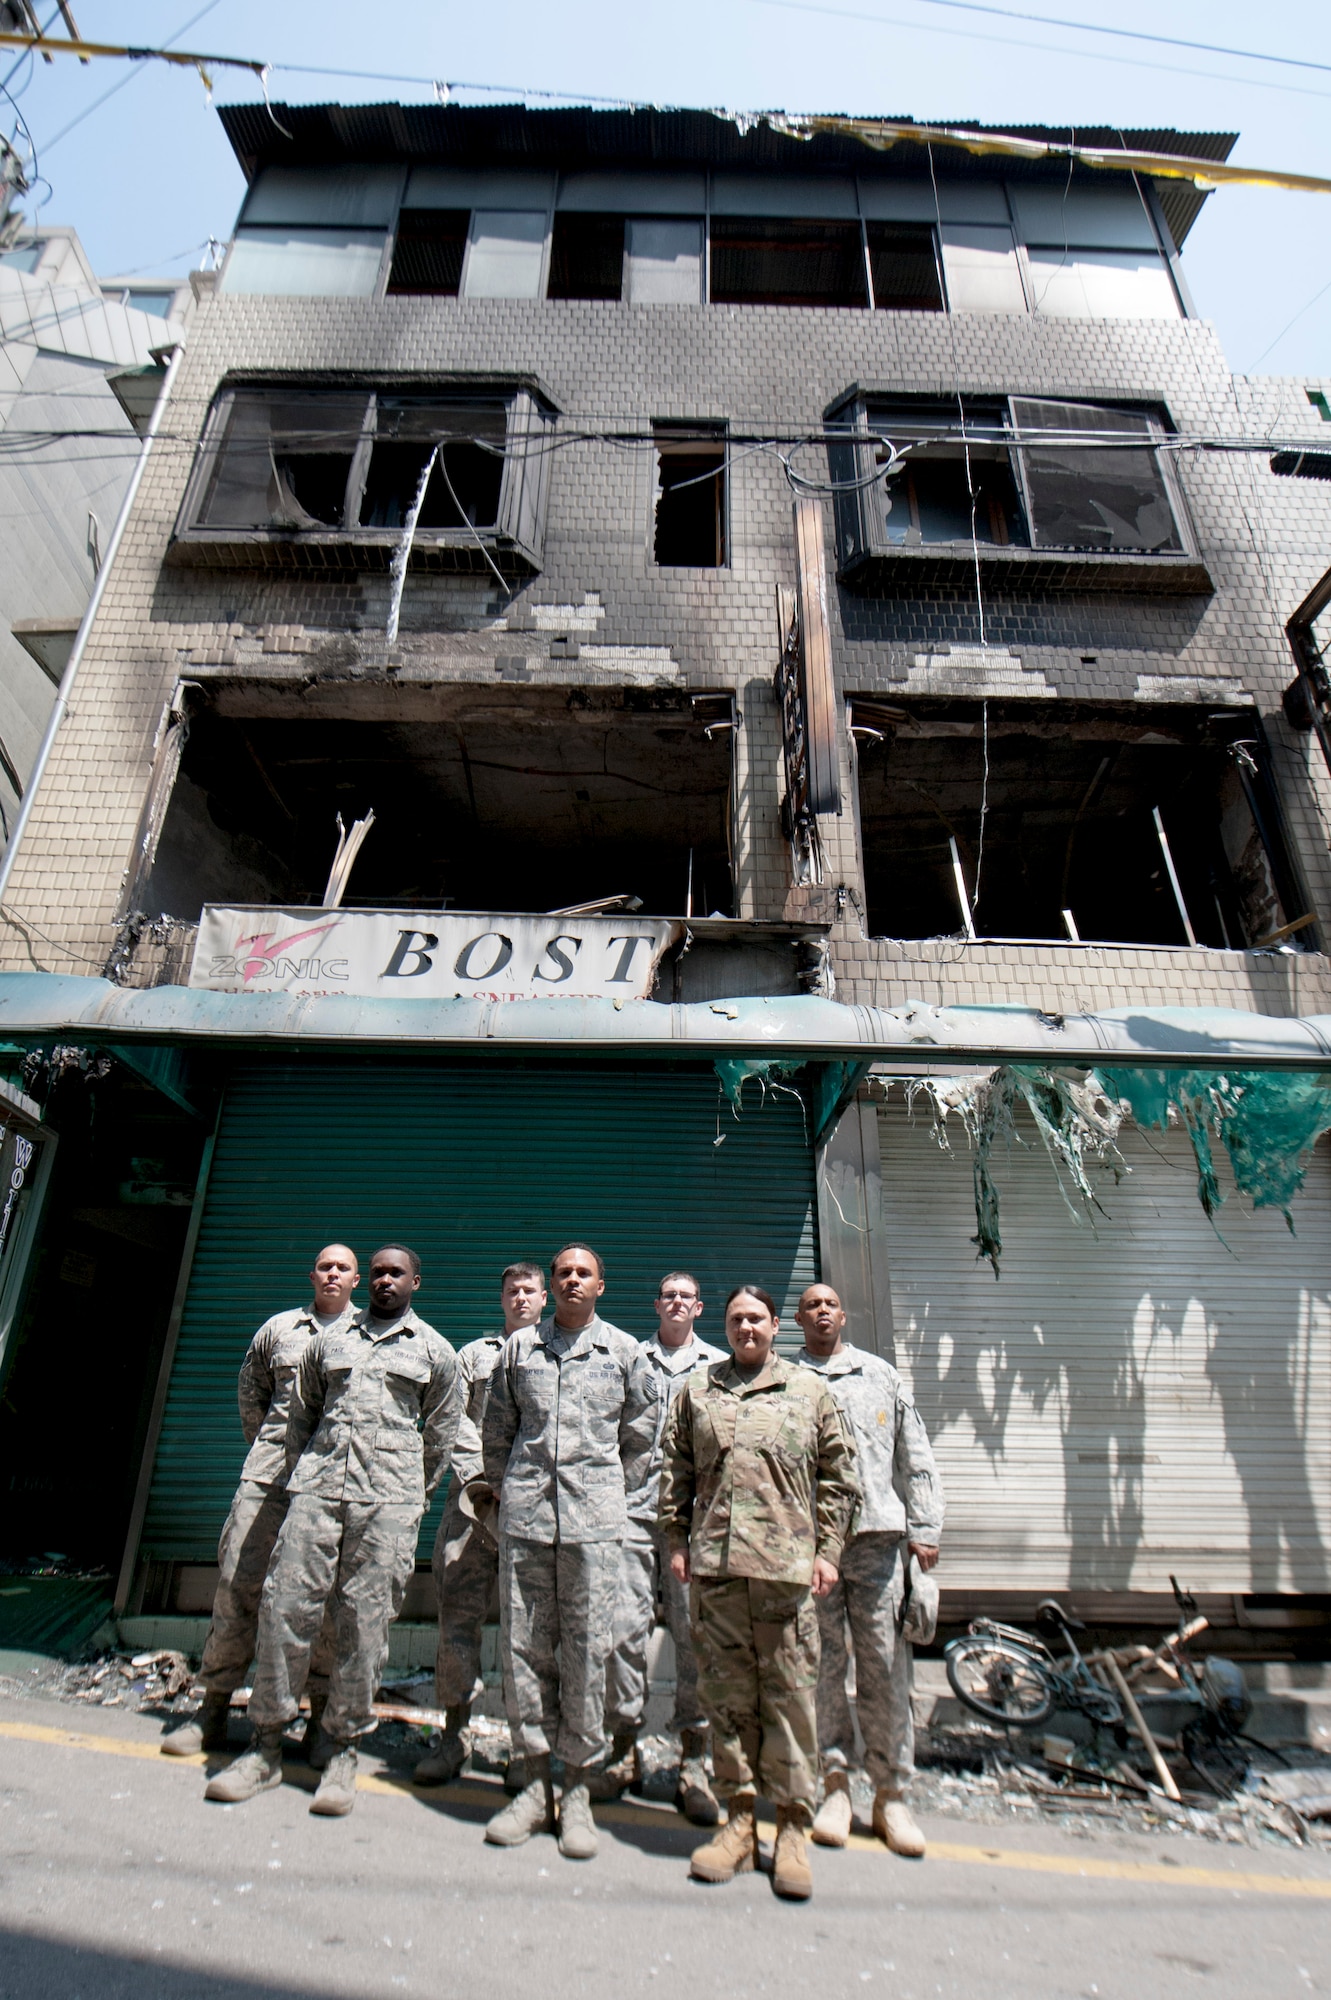 Team Osan members pose near the building that caught fire at Songtan shopping district, Republic of Korea, May 2, 2016. The Airmen and Soldiers, along with many onlookers worked together to save the lives of an Airmen, mother and her three children when a fire broke out on April 29, 2016. (U.S. Air Force photo by Staff Sgt. Jonathan Steffen/Released